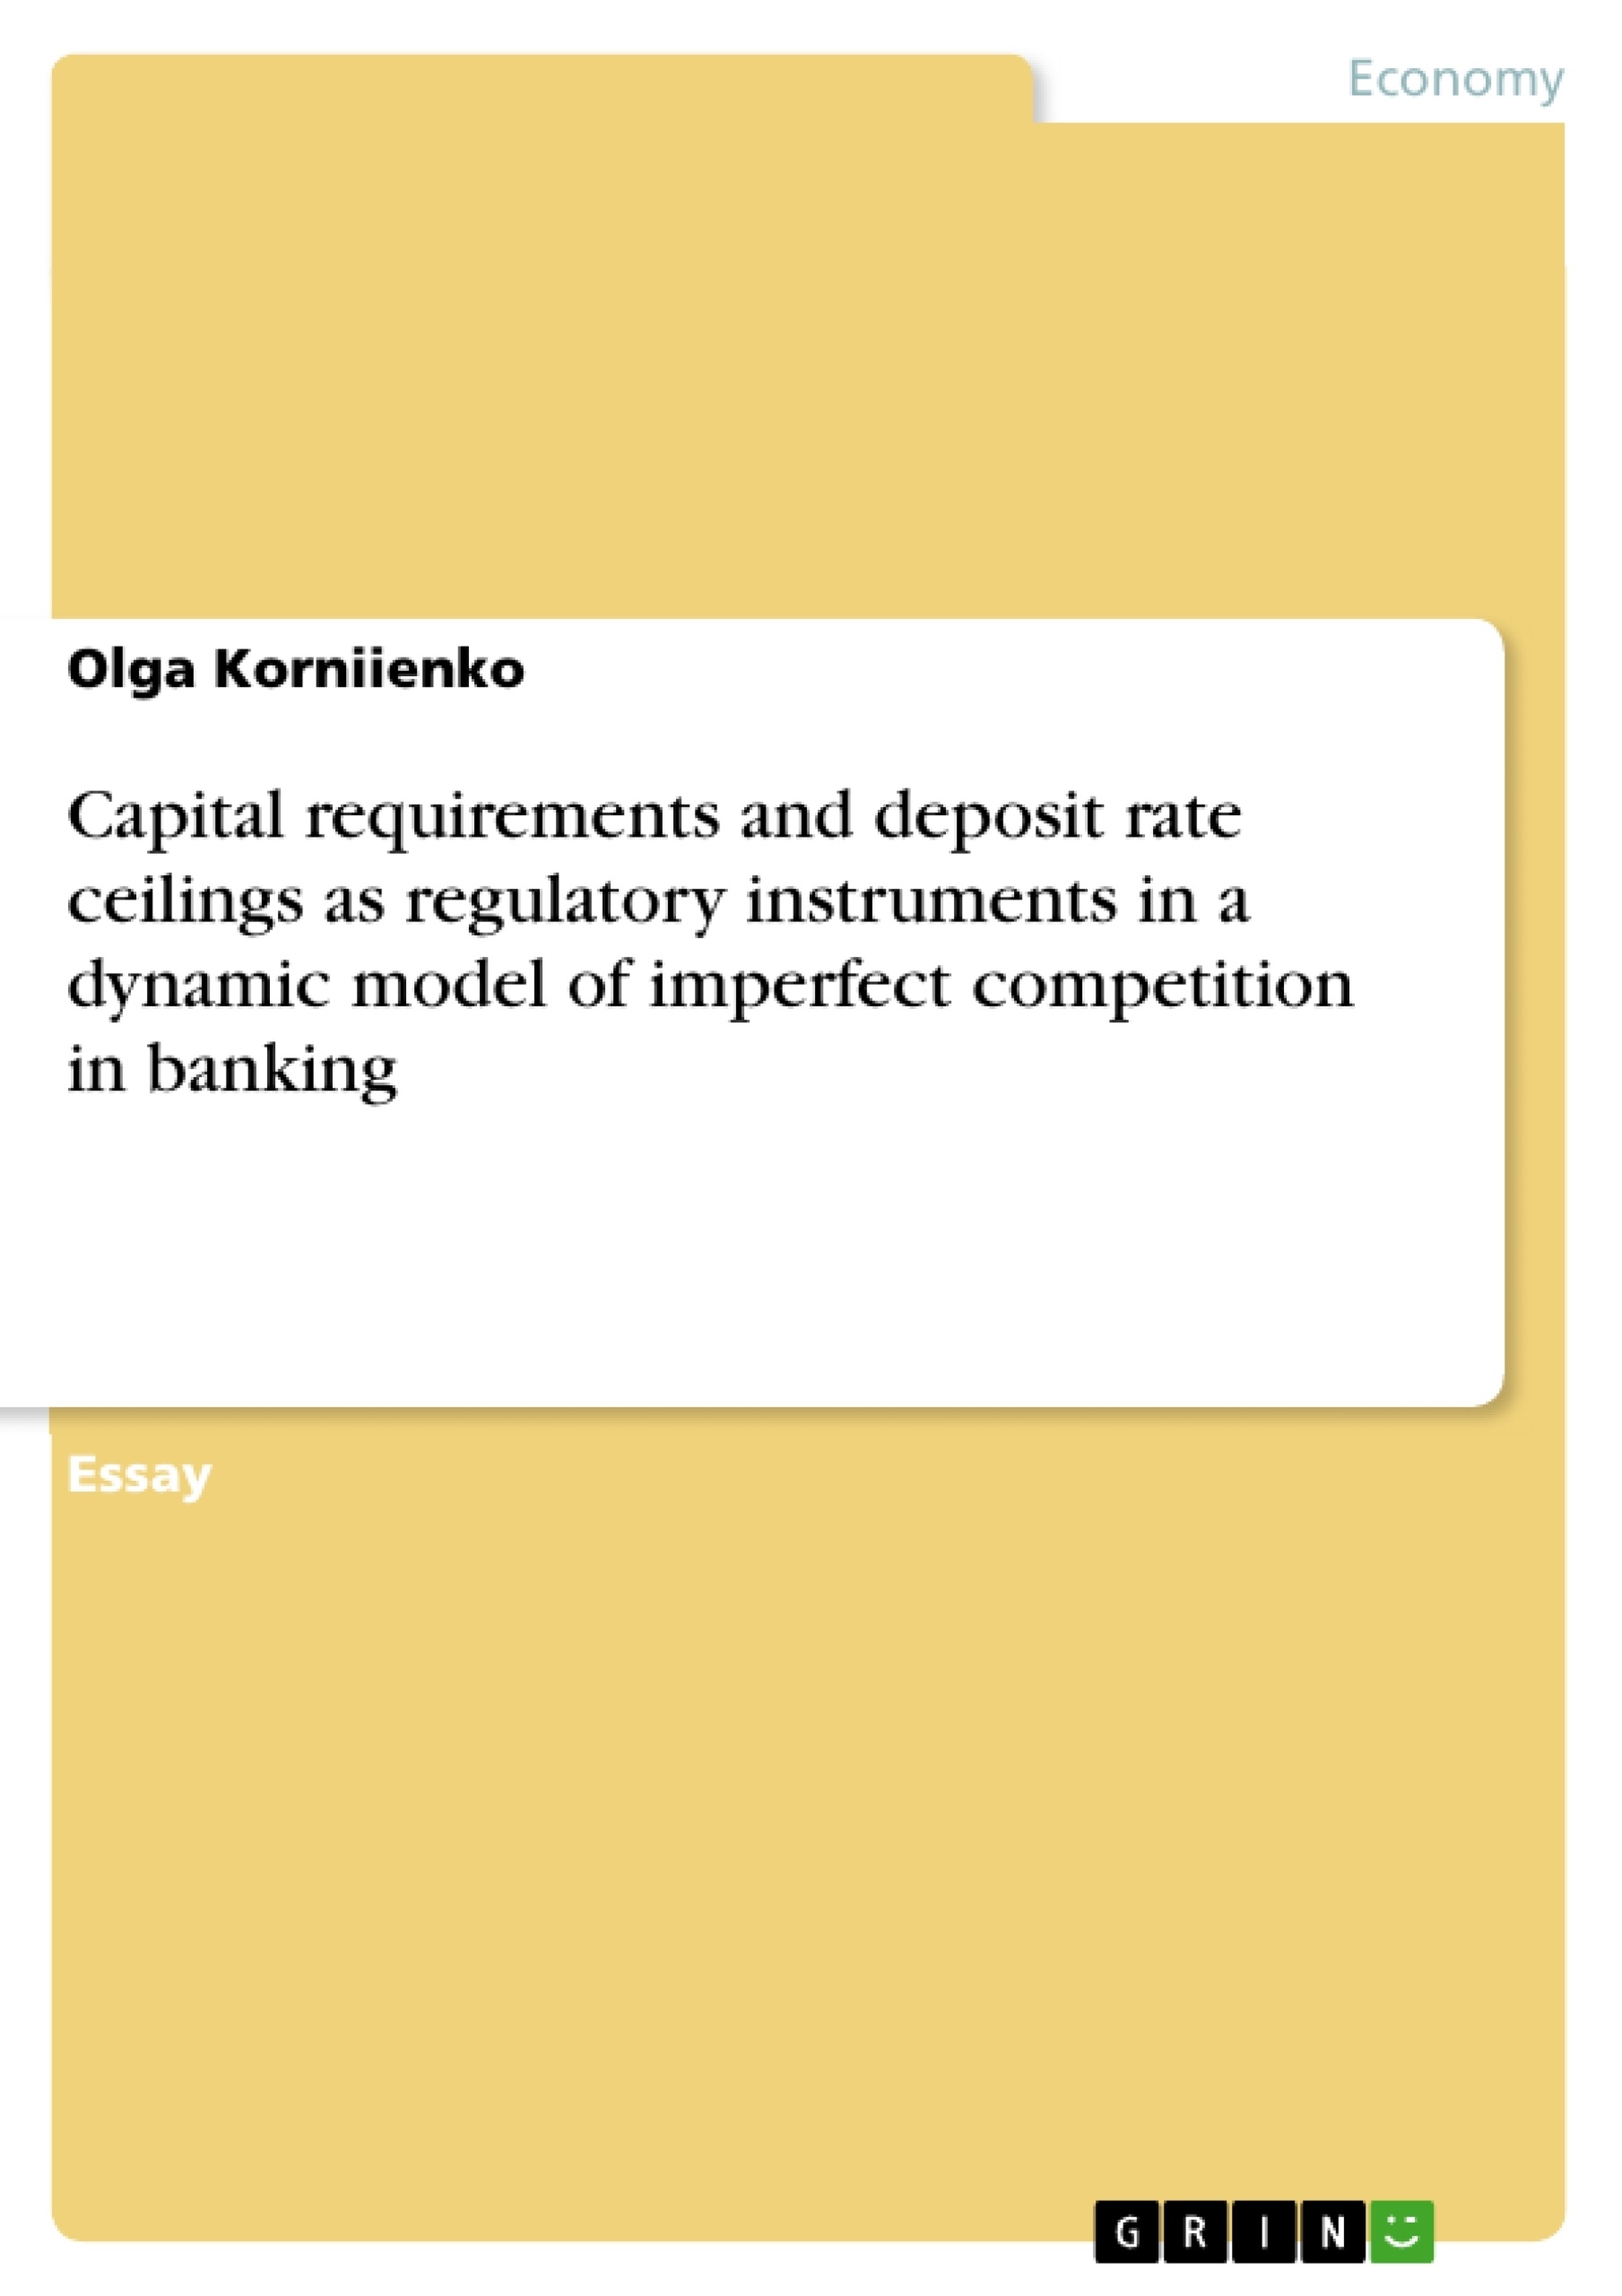 Titel: Capital requirements and deposit rate ceilings as regulatory instruments in a dynamic model of imperfect competition in banking